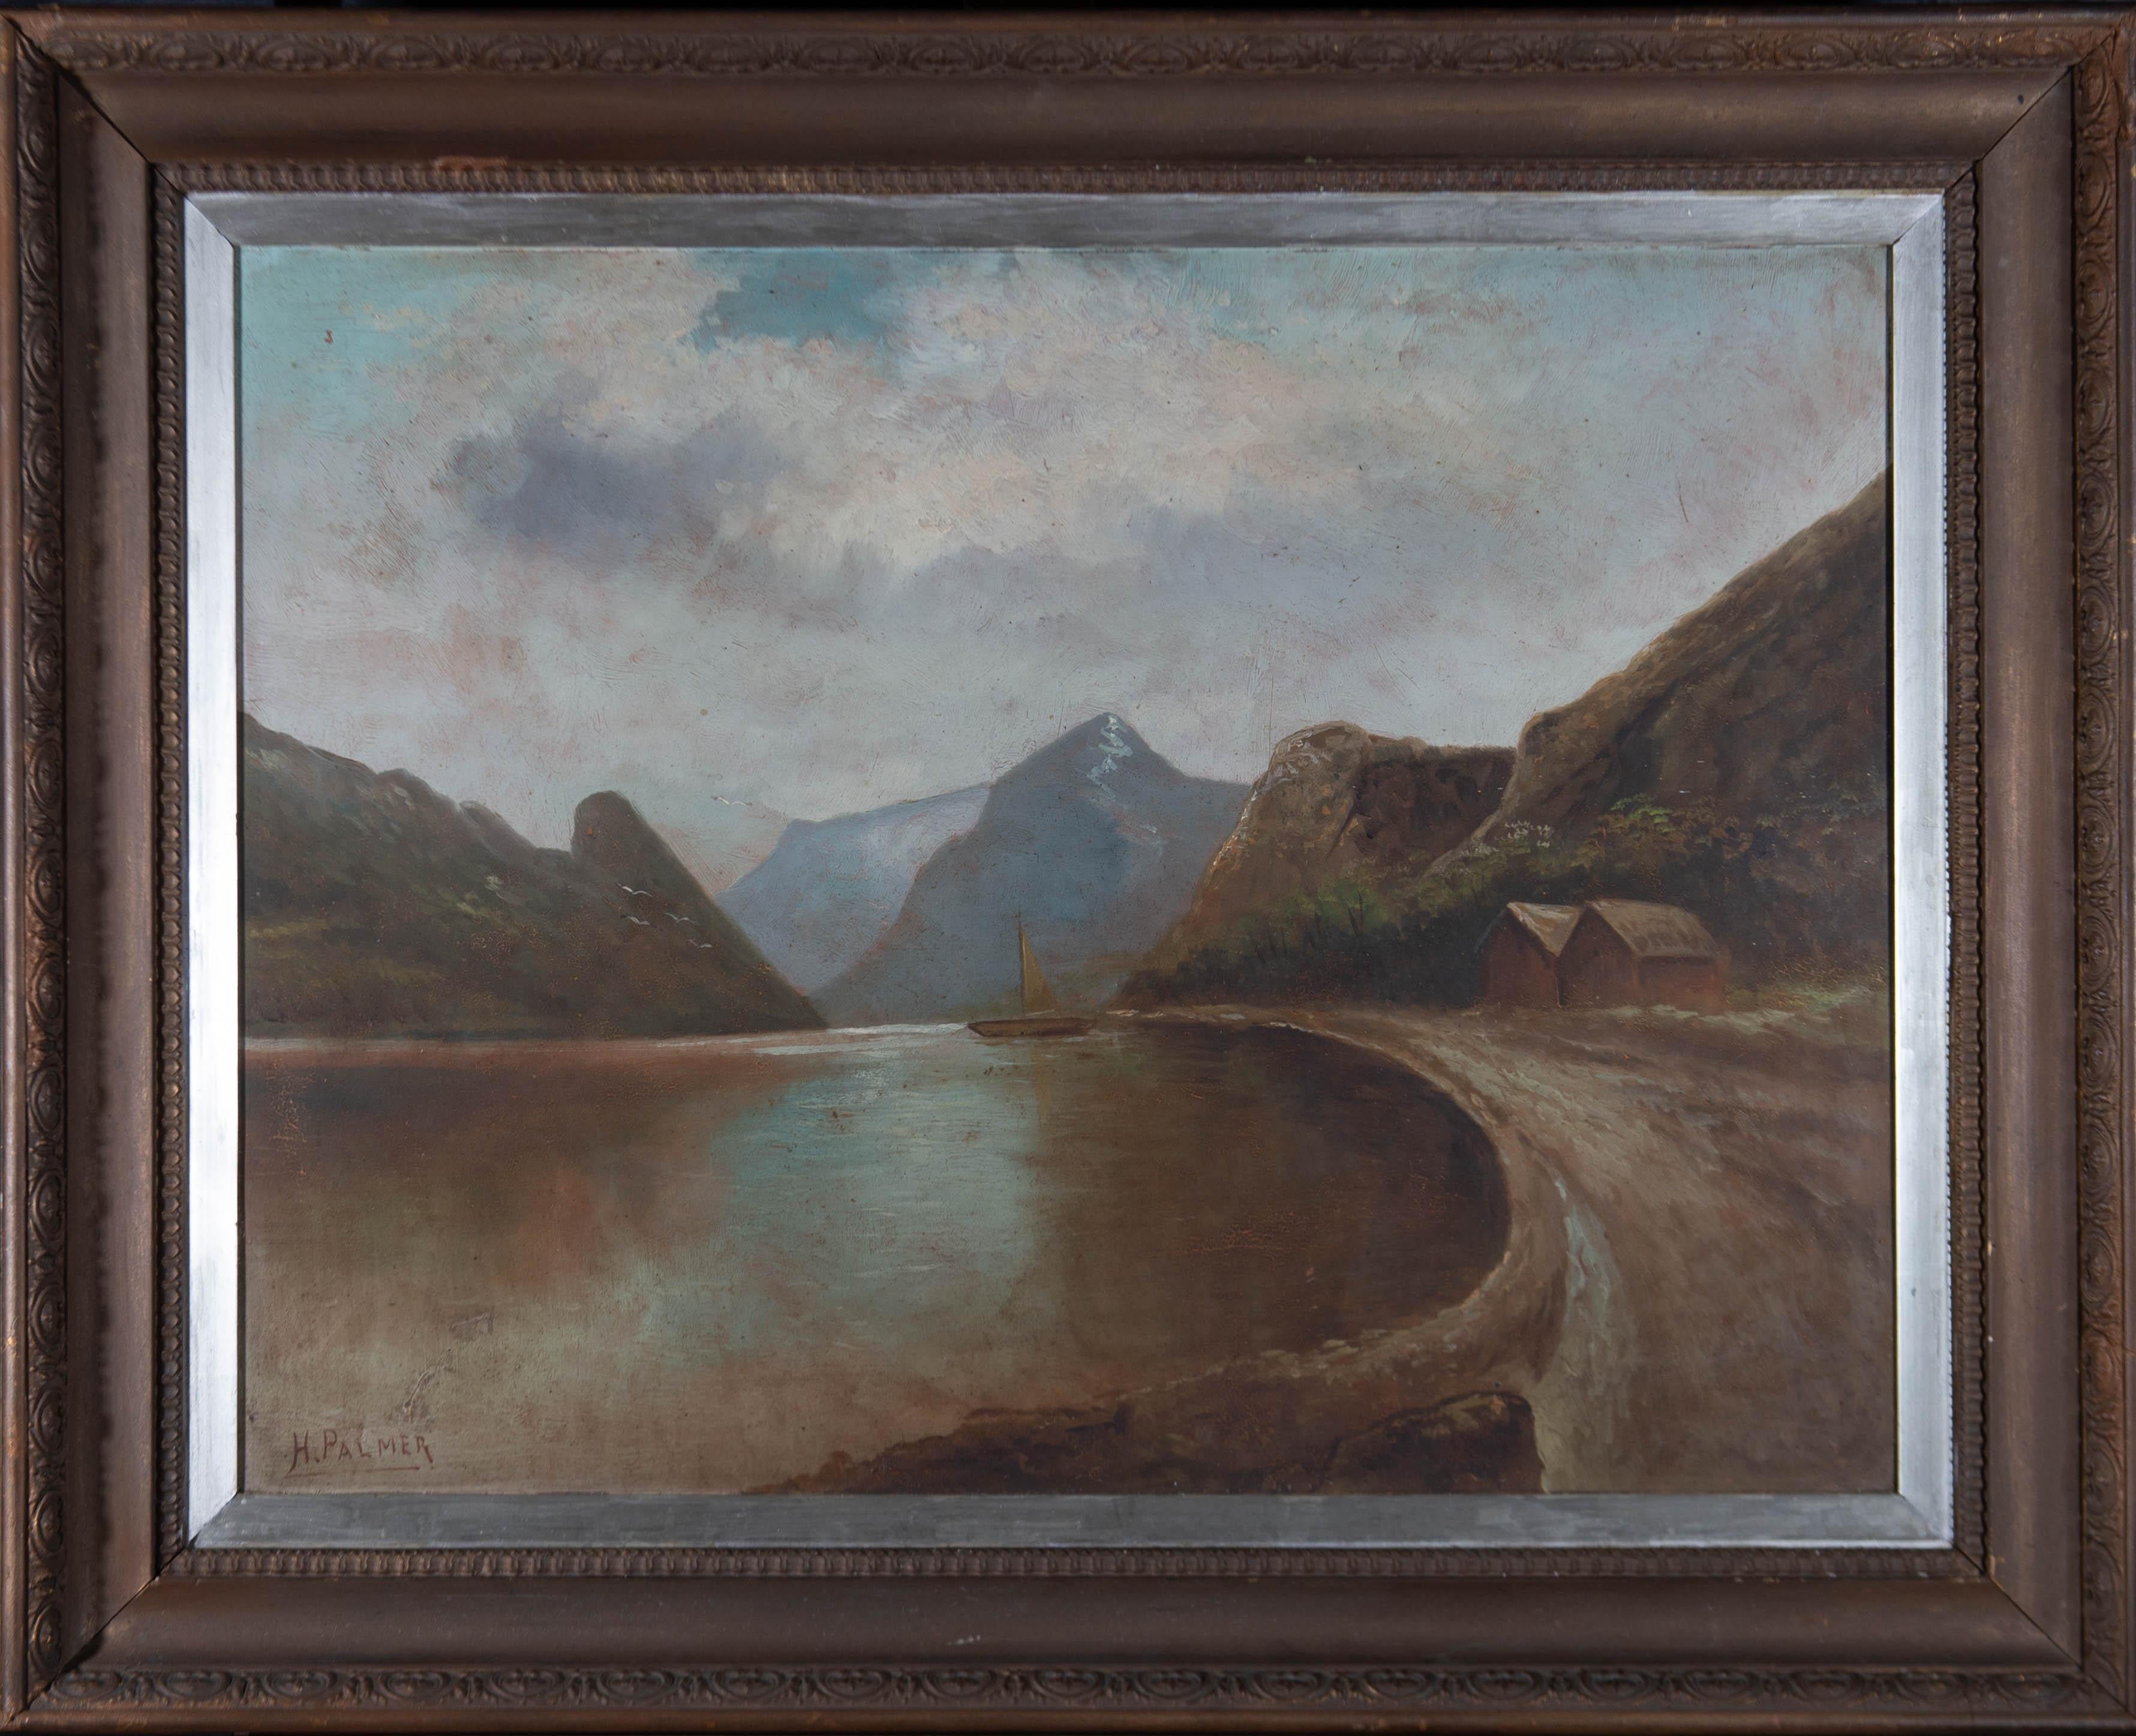 A landscape featuring a lodge by the lake and a boat on the water with mountains in the distance. Presented in an ornate gilt-effect wooden frame with a lamb's tongue running pattern to the inner edge and a silver slip. Signed to the lower-left